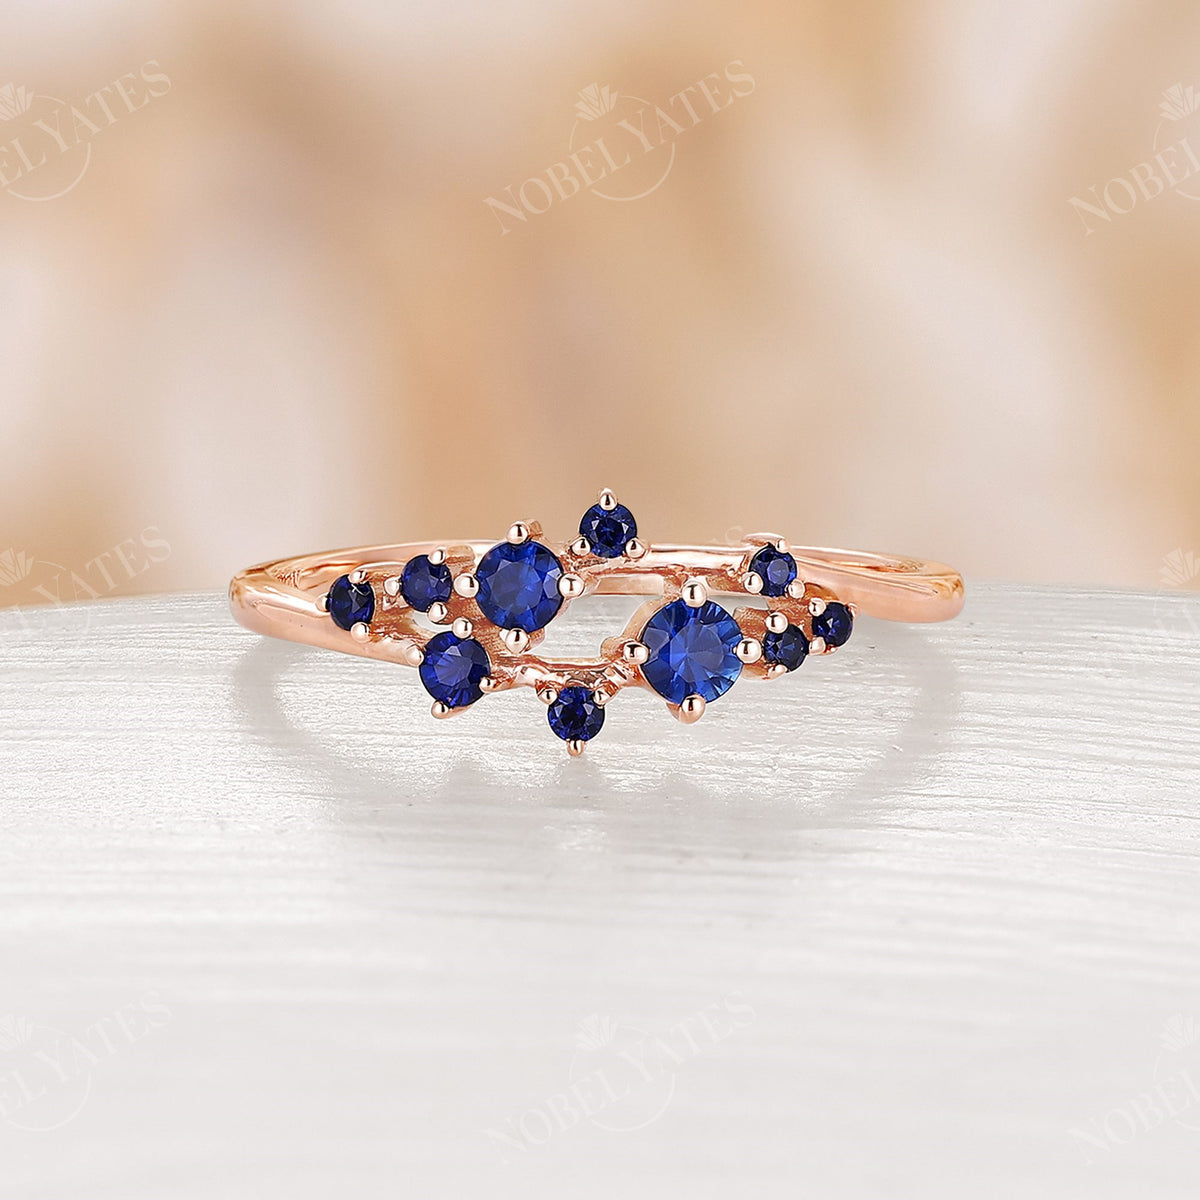 Vintage Round Cut Natural Sapphire Cluster Wedding Band Rose Gold